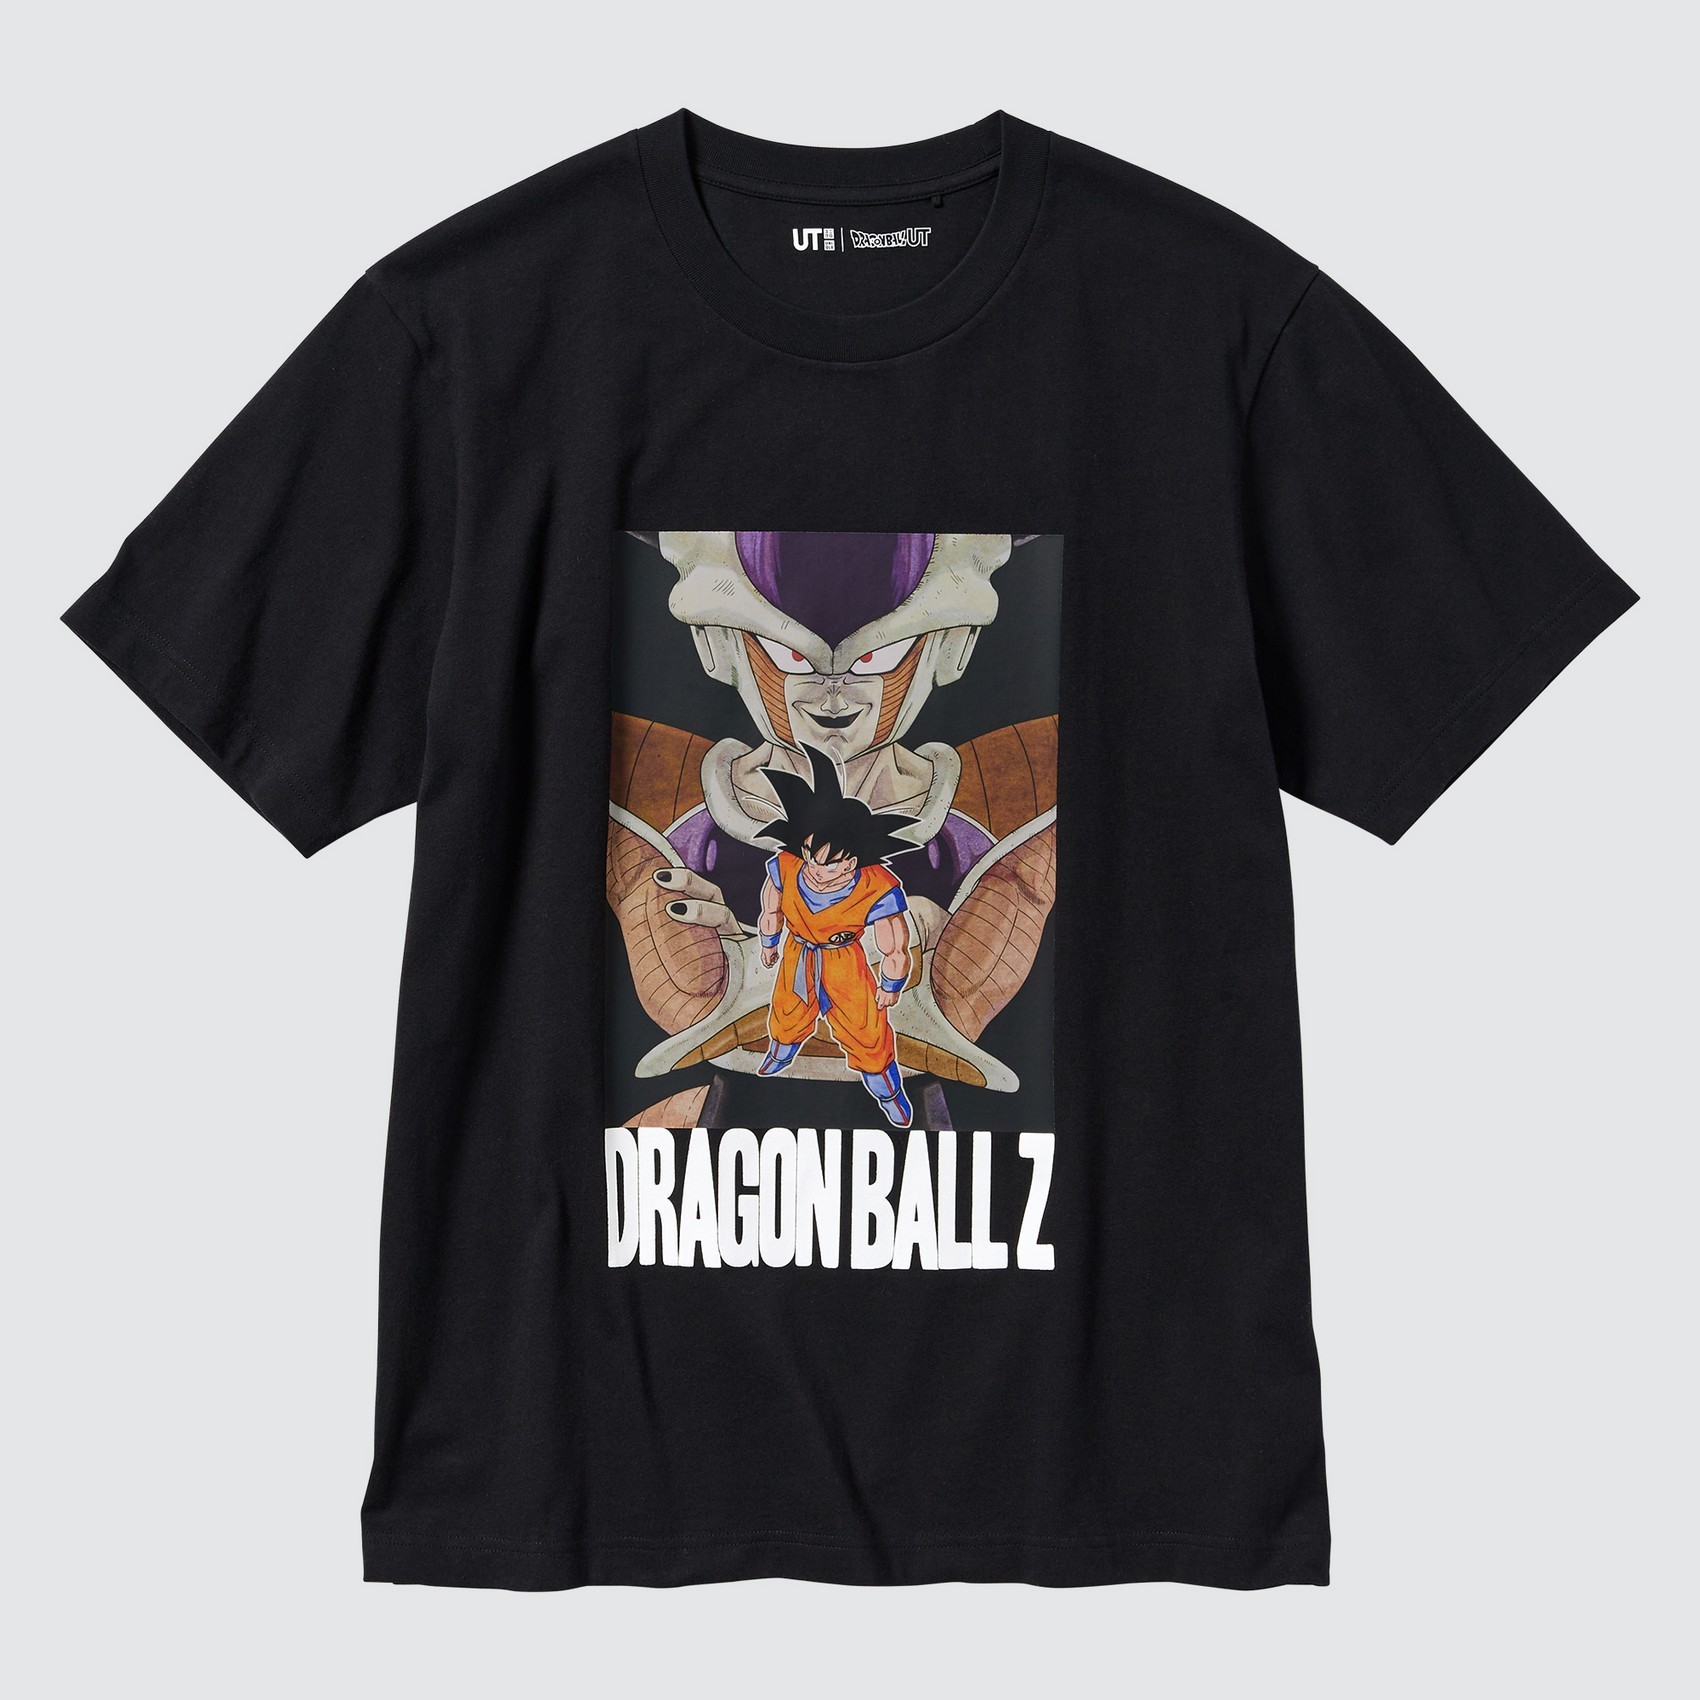 The Uniqlo x Dragon Ball 2023 UT collection is now available in the